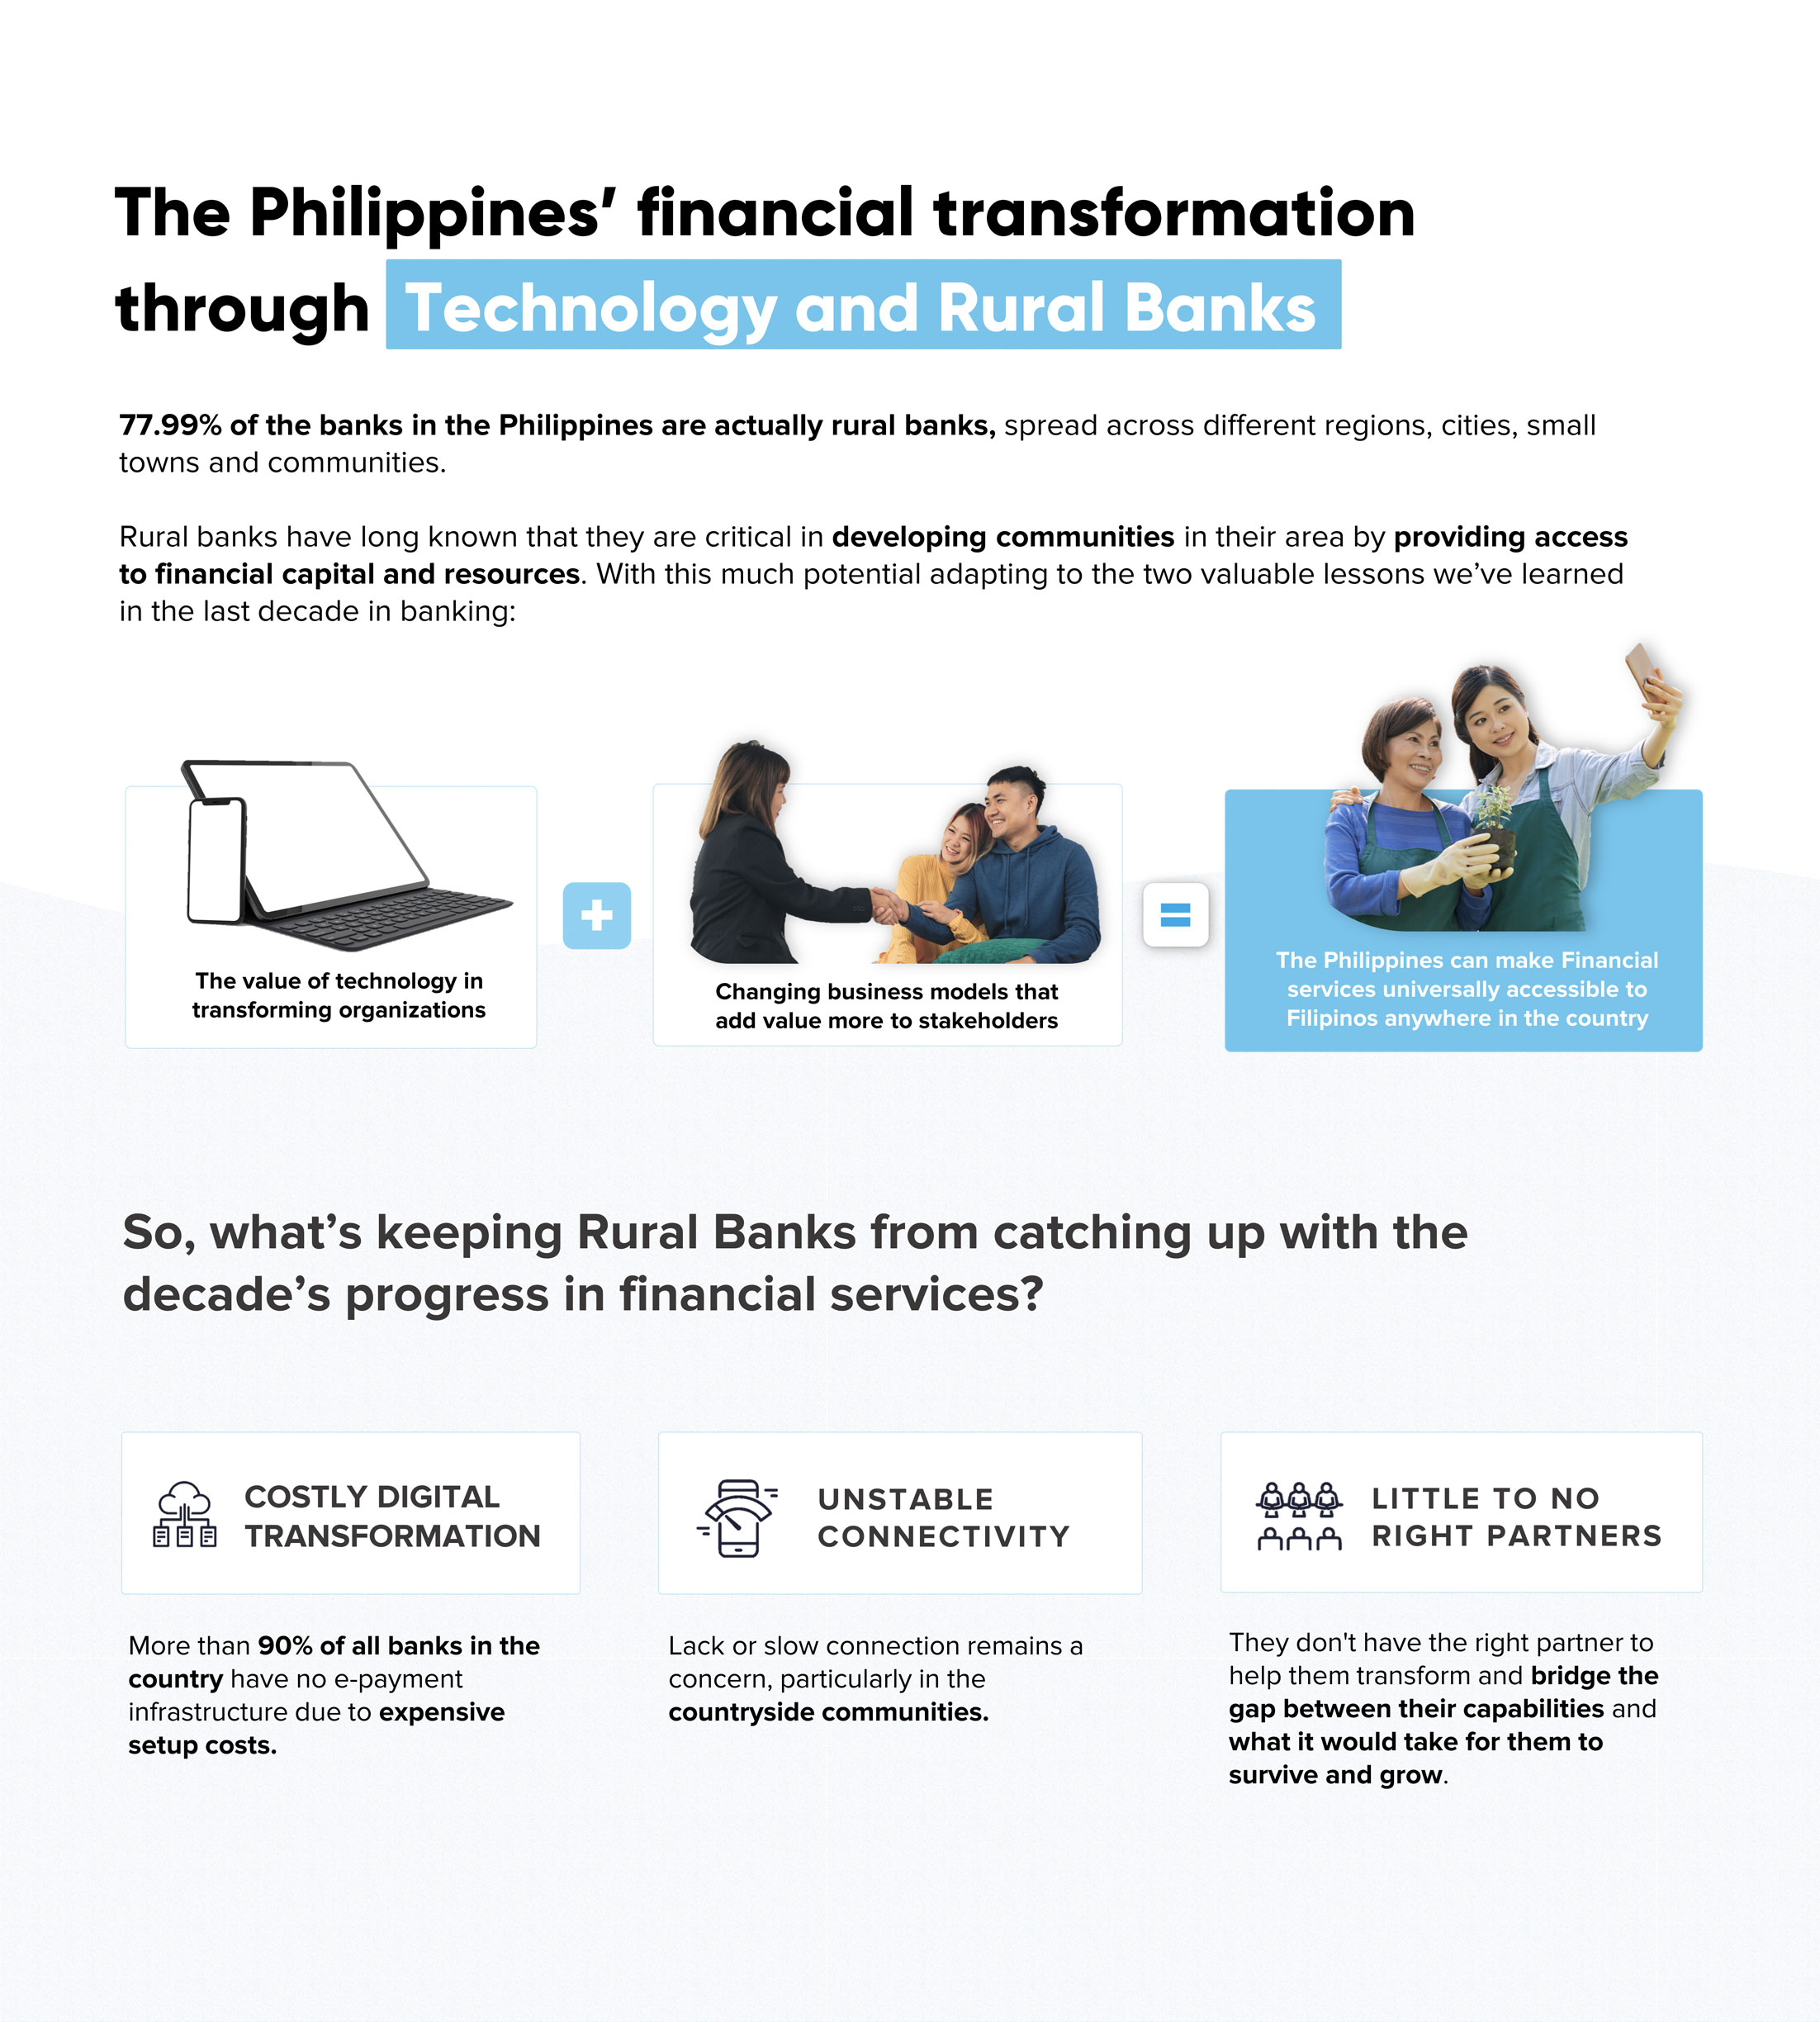 The Philippines financial transformation through Technology and Rural Banks